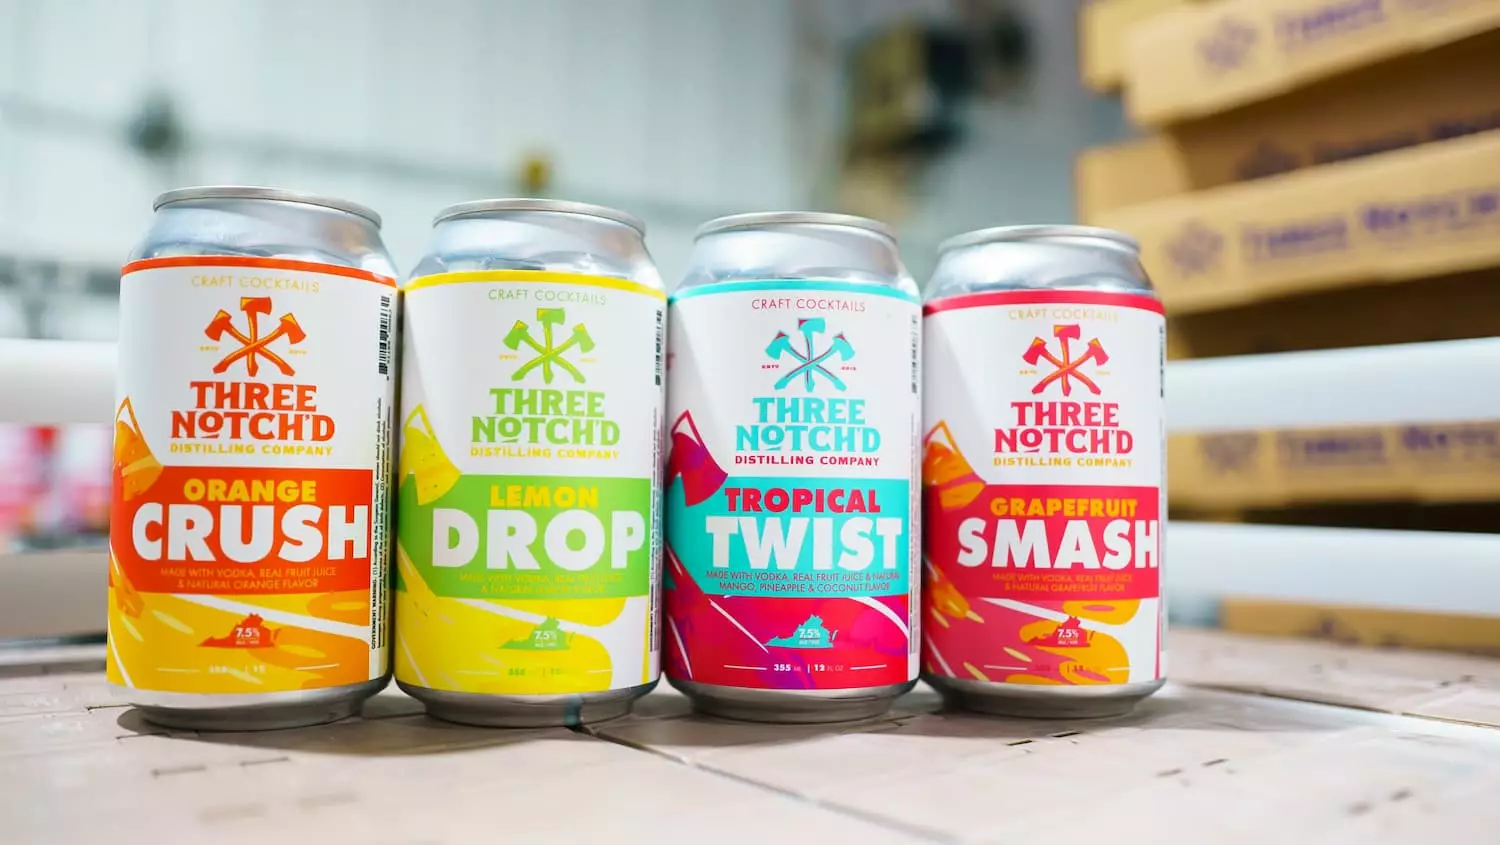 Canned cocktails made by Three Notch'd Brewing